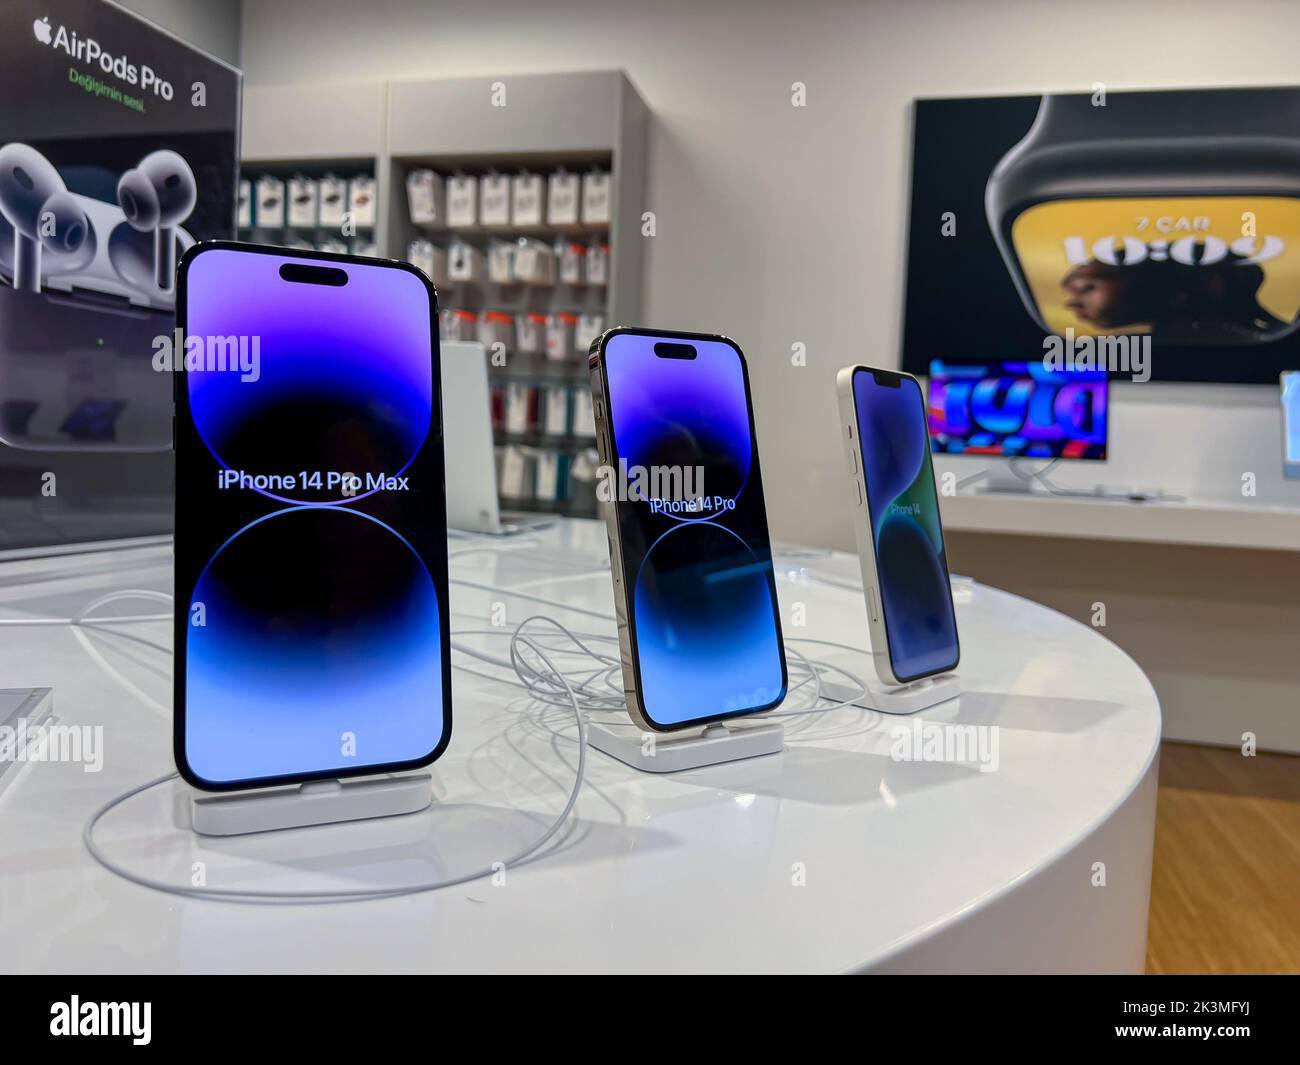 Antalya, Turkey - September 27, 2022: iphone 14 pro max smartphone newly launched in apple store Stock Photo